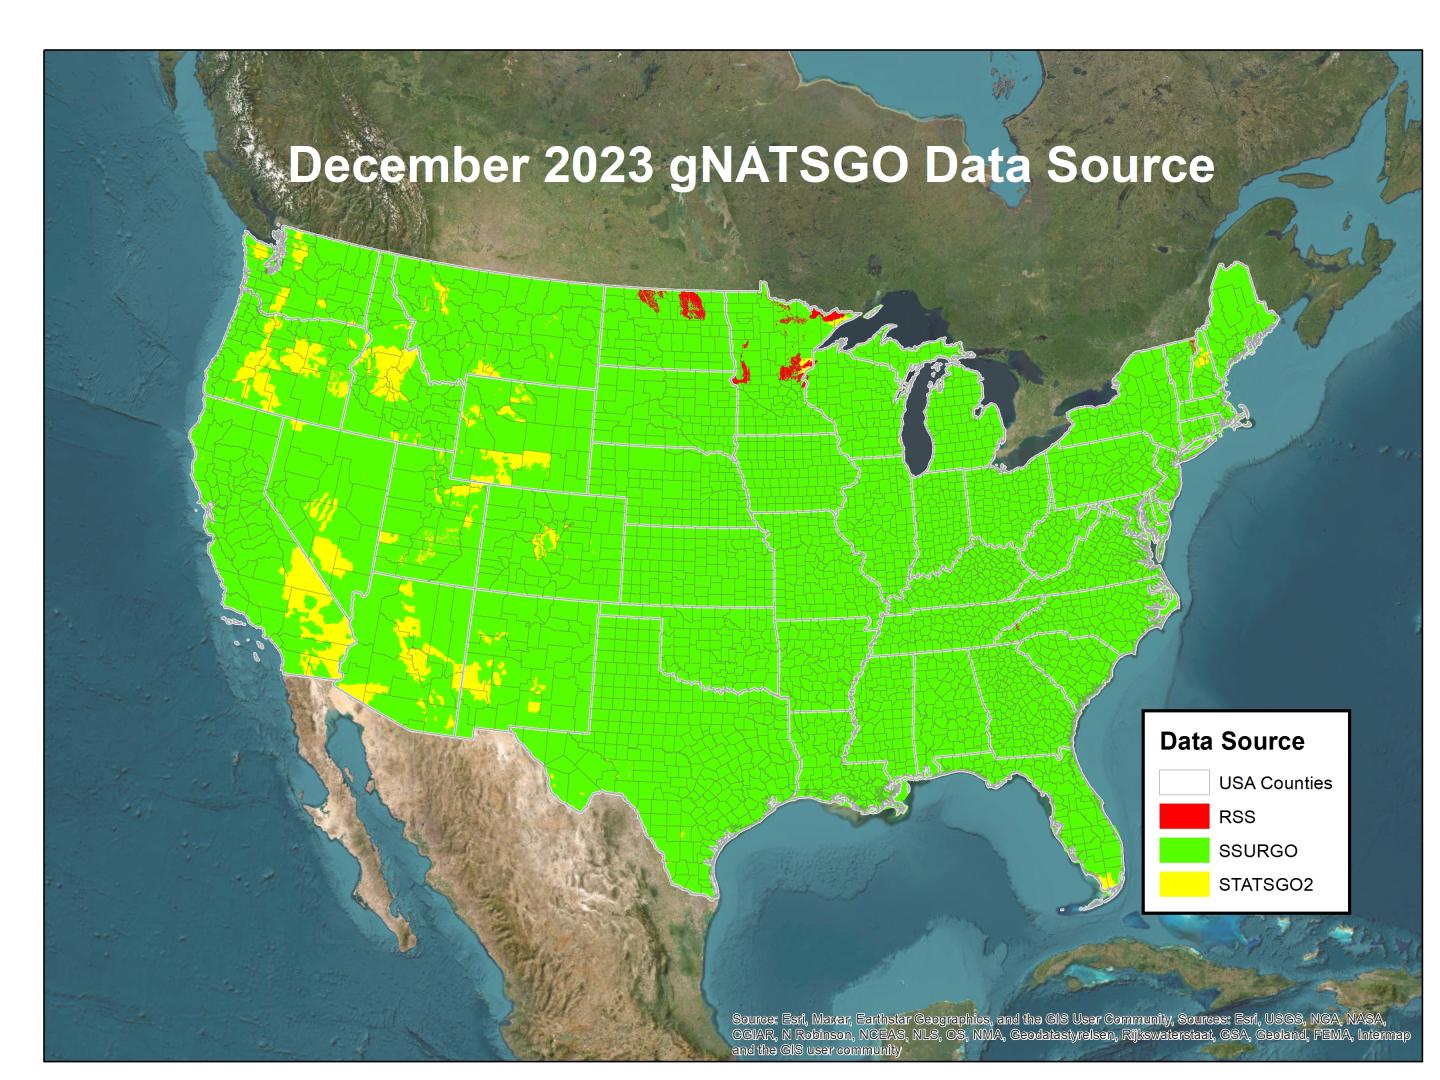 Figure 1 shows the distribution of SSURGO, STATSGO2, and RSSs in gNATSGO for the conterminous United States.